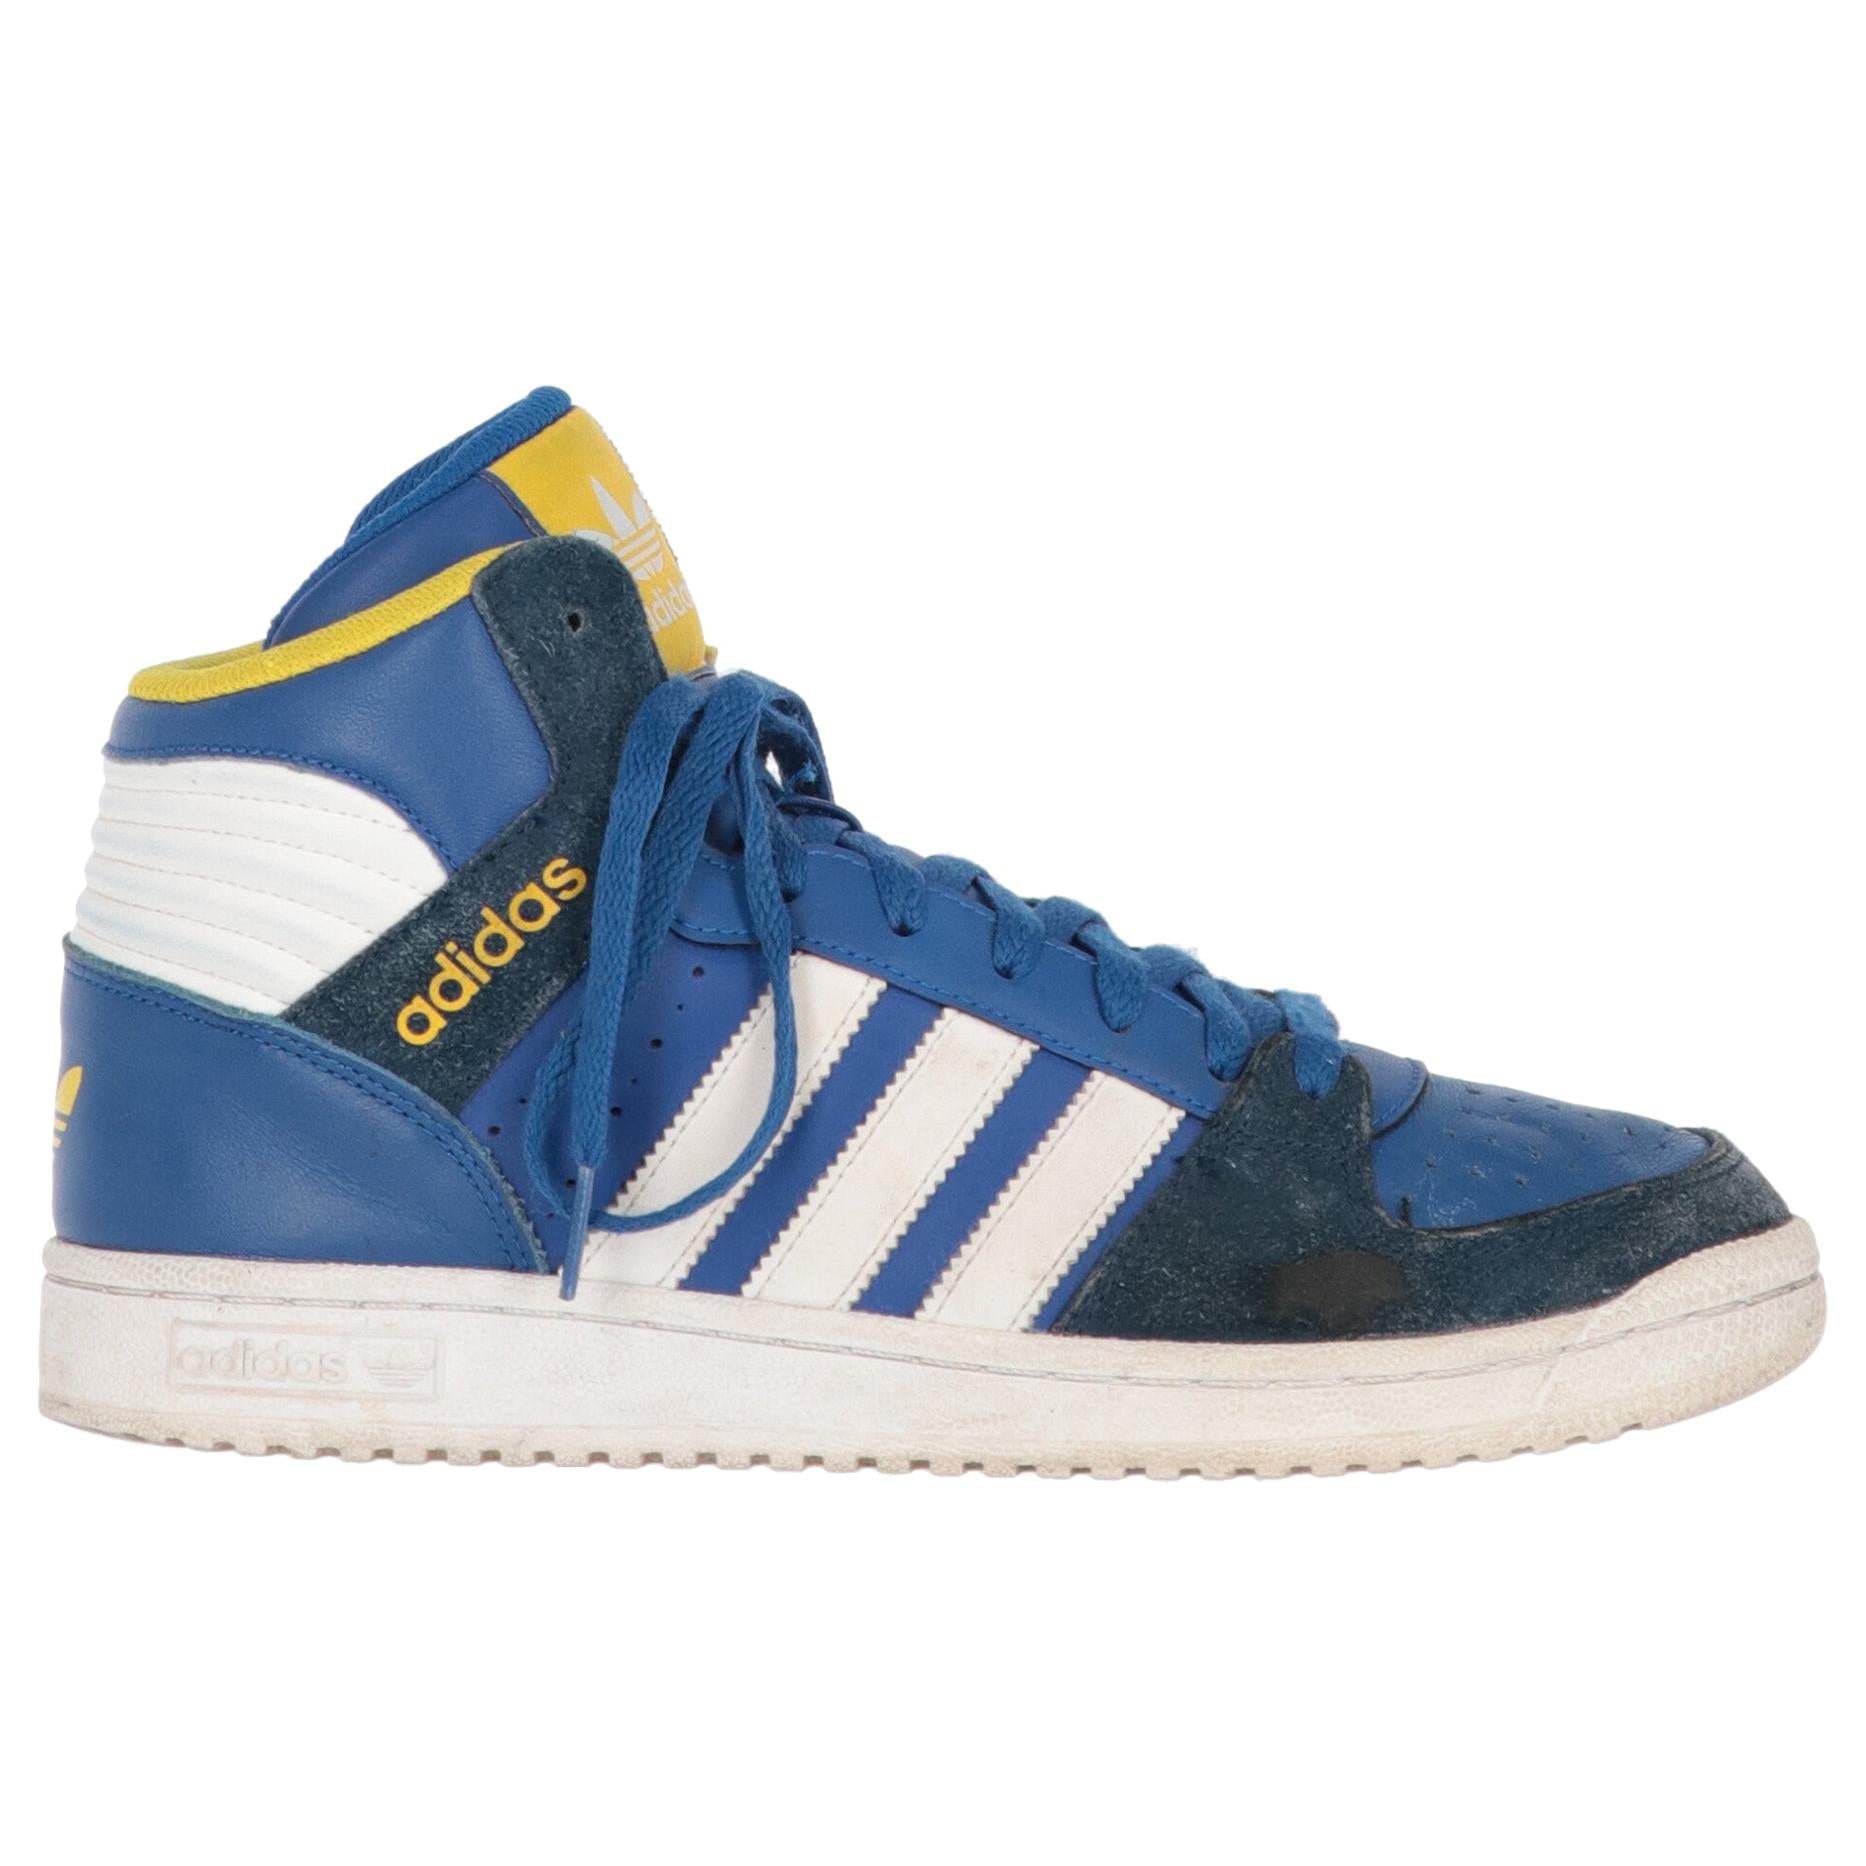 Adidas Vintage Shoes - 3 For Sale on 1stDibs